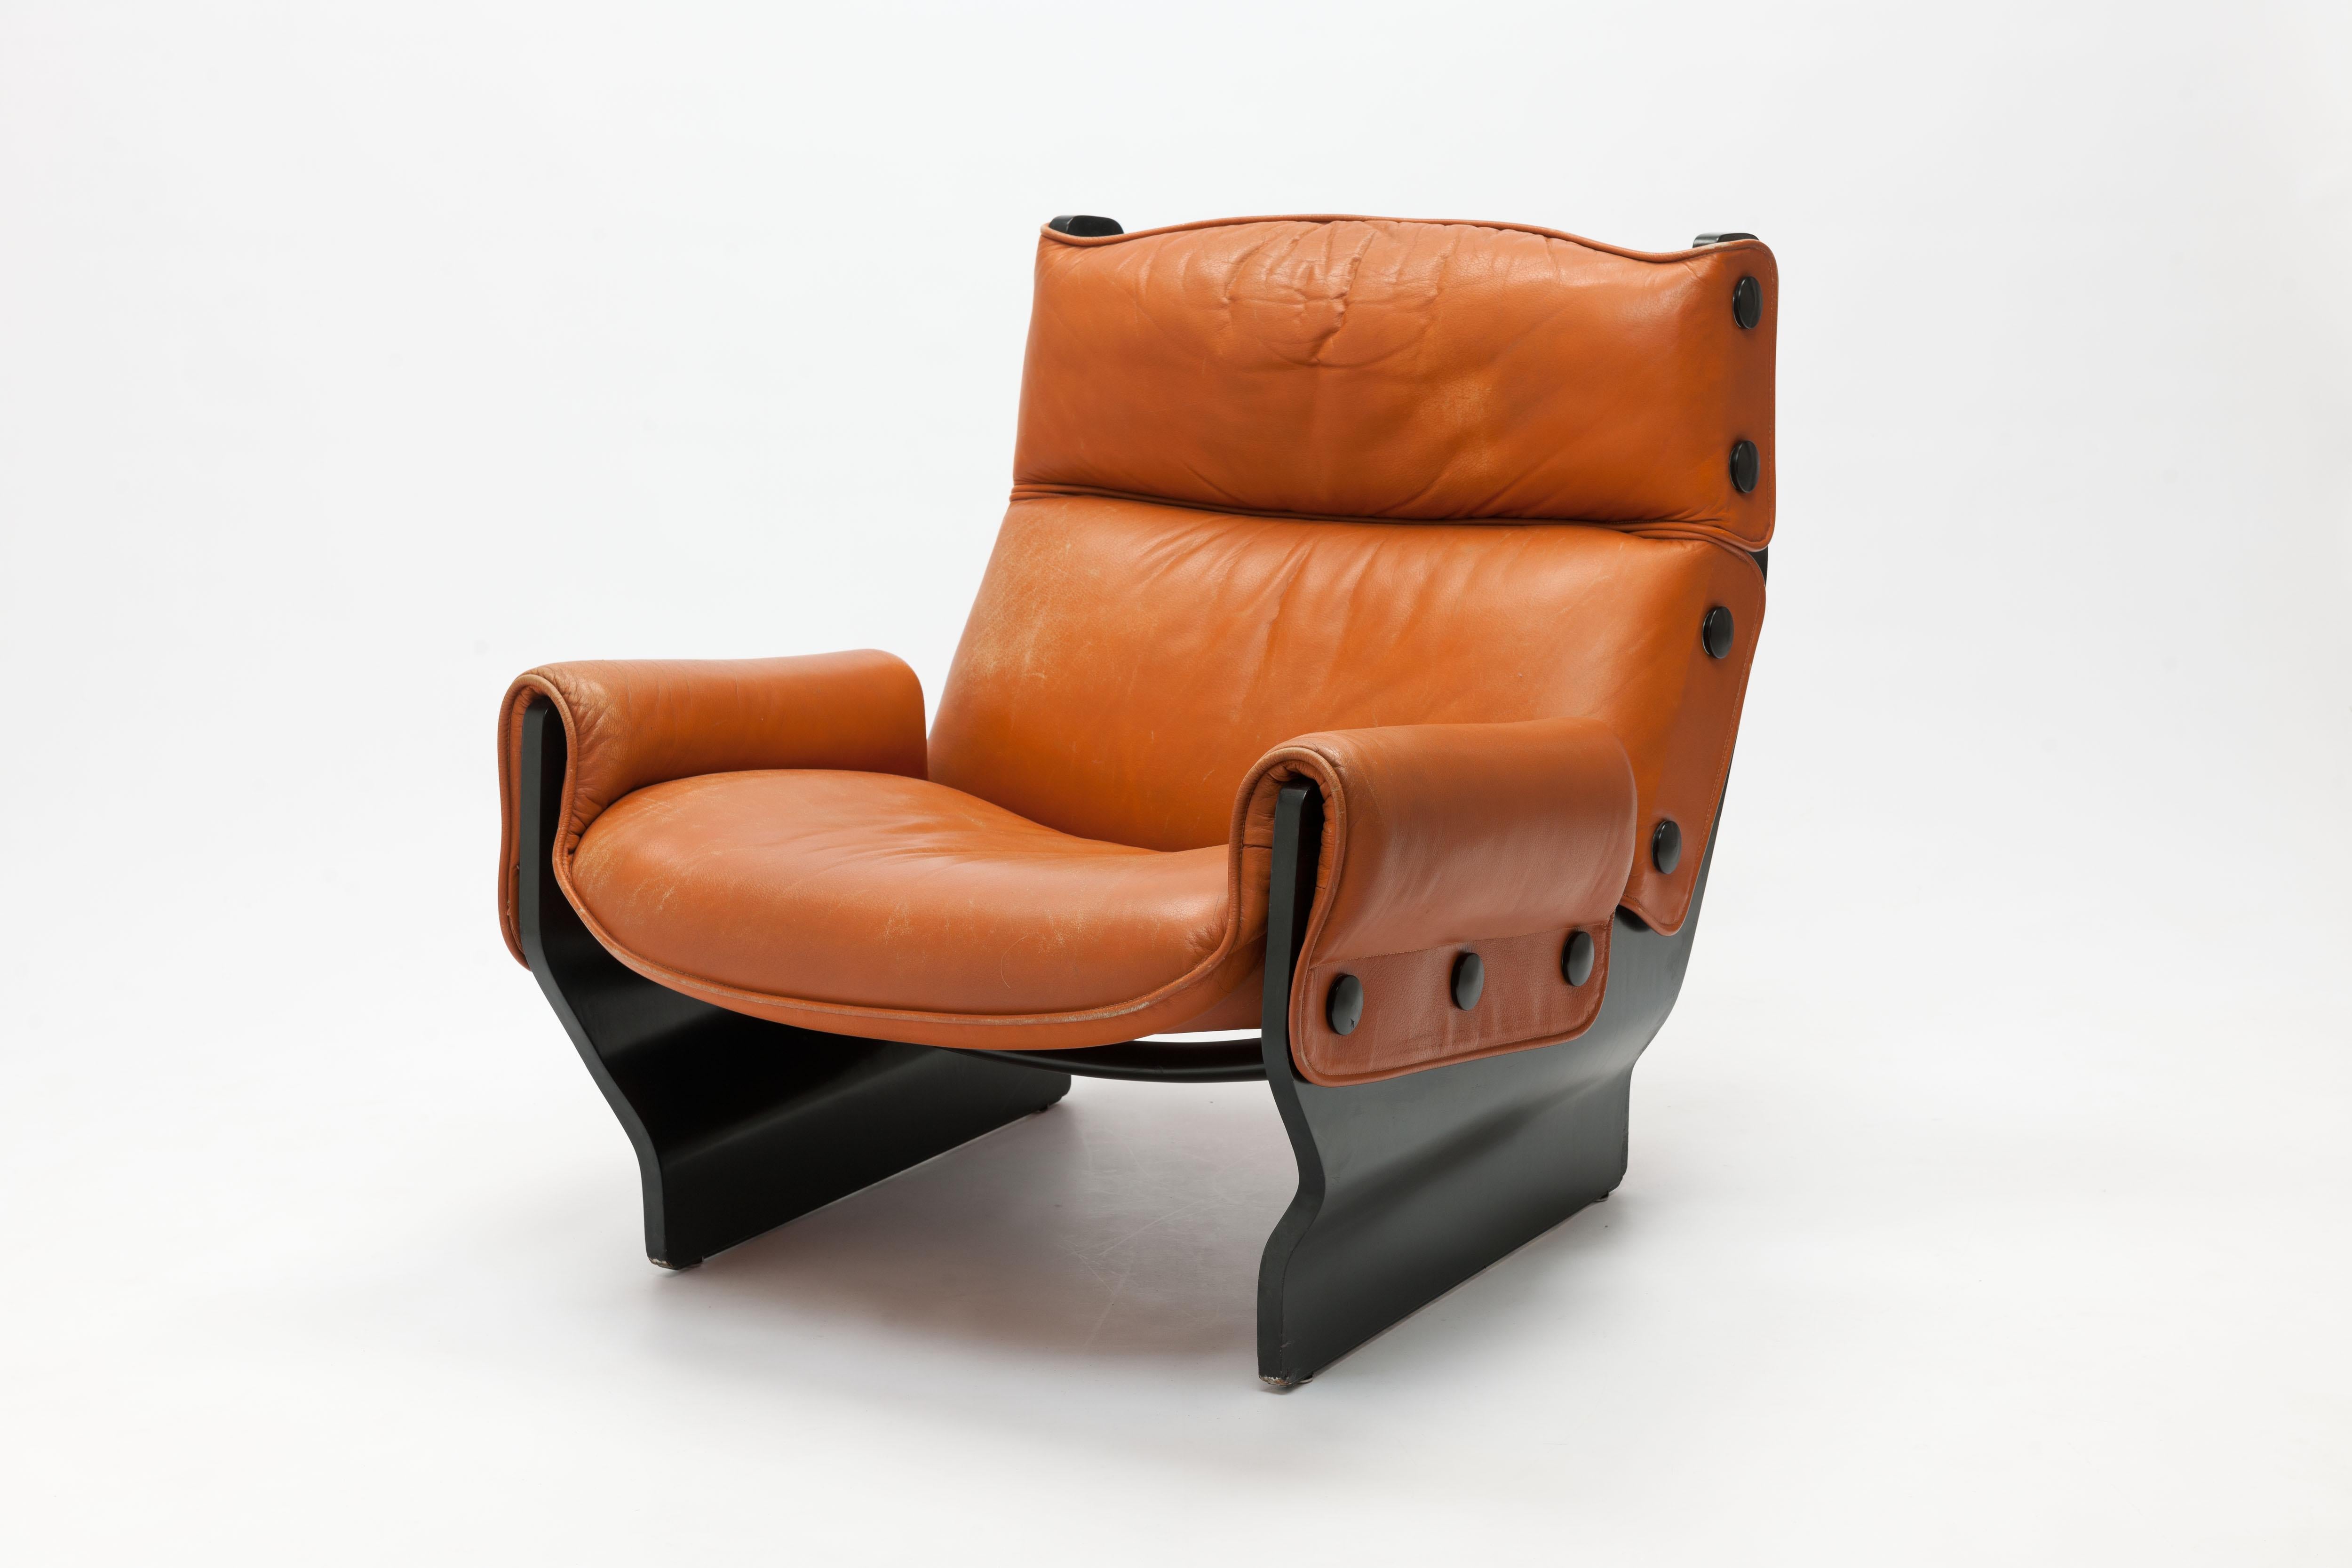 All original 1970s P110 / 'Canada' lounge chair by Osvaldo Borsani for Tecno, Italy.
Black frame with original leather upholstery.
Borsani designed this bold lounge chair in 1965 part of the 'slender line', it is a smart knock down construction